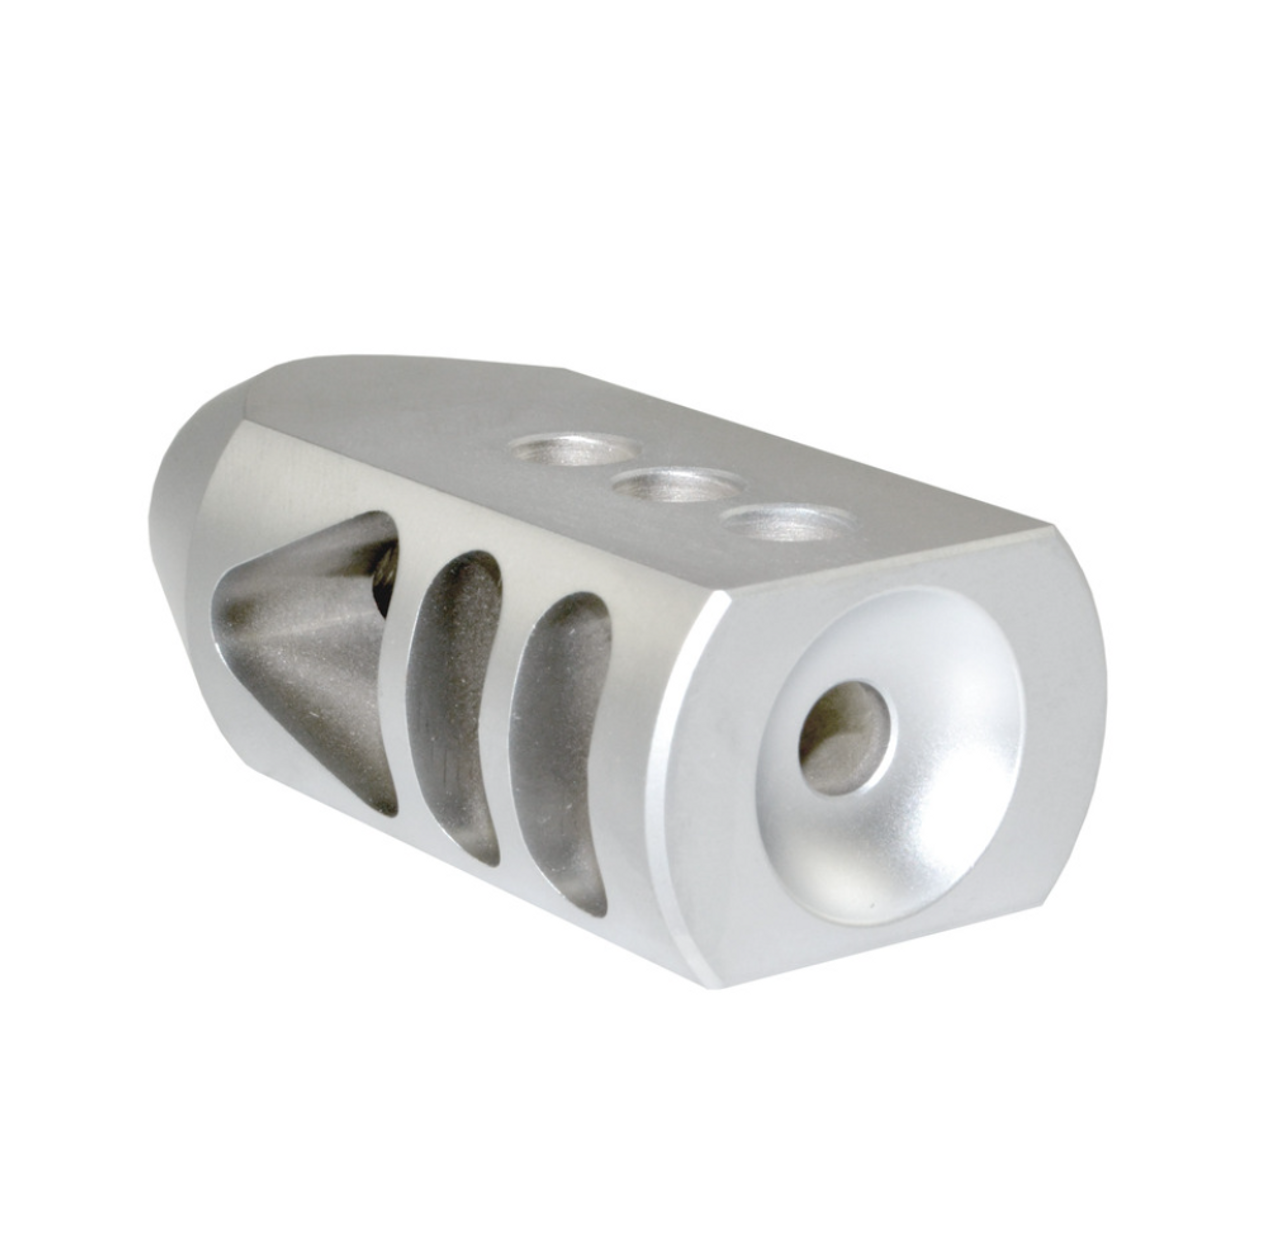 Competition Grade Muzzle Brake Recoil Compensator for 308, 5/8"x24 thread, Stainless Steel Matte